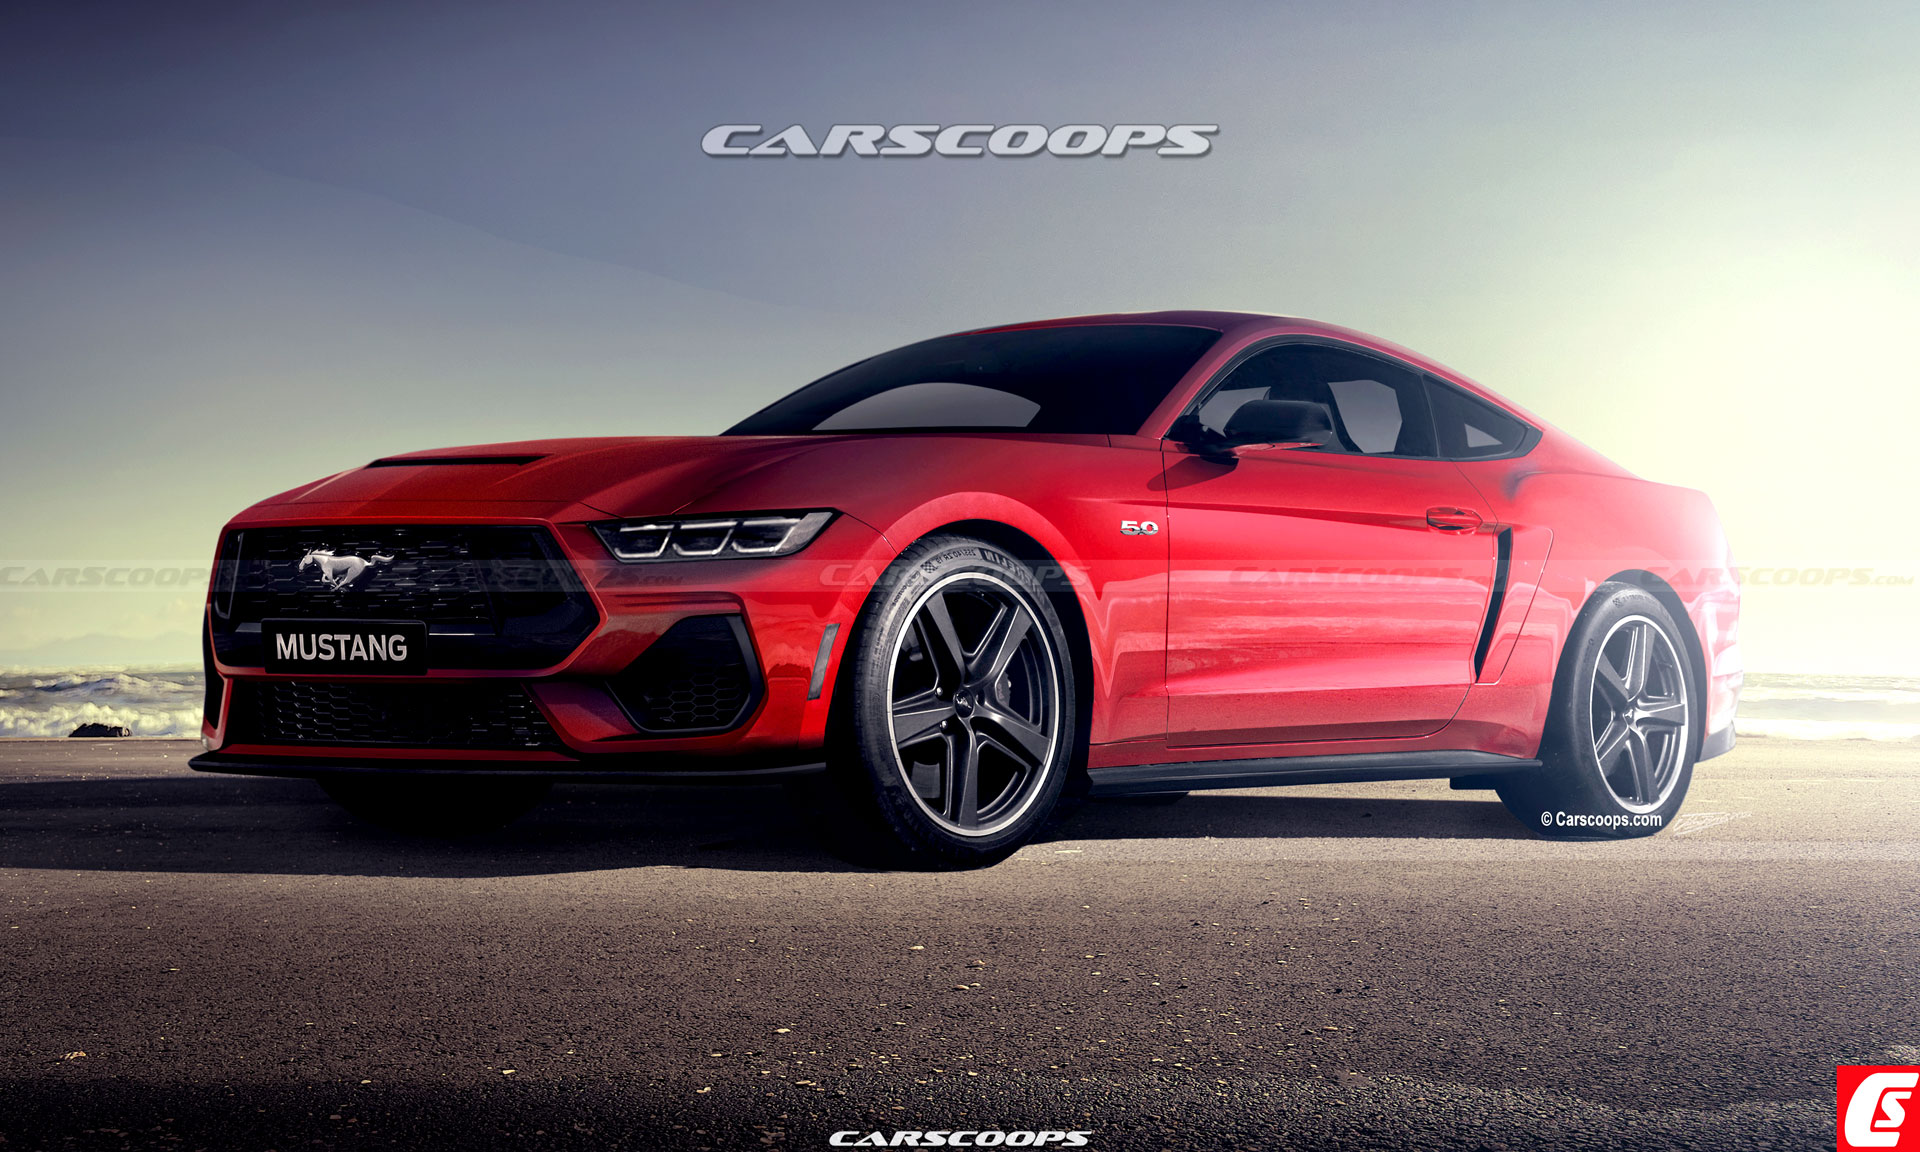 S650 Mustang Newest S650 Mustang rendering by Carscoops based on leak looks real 1653764196822